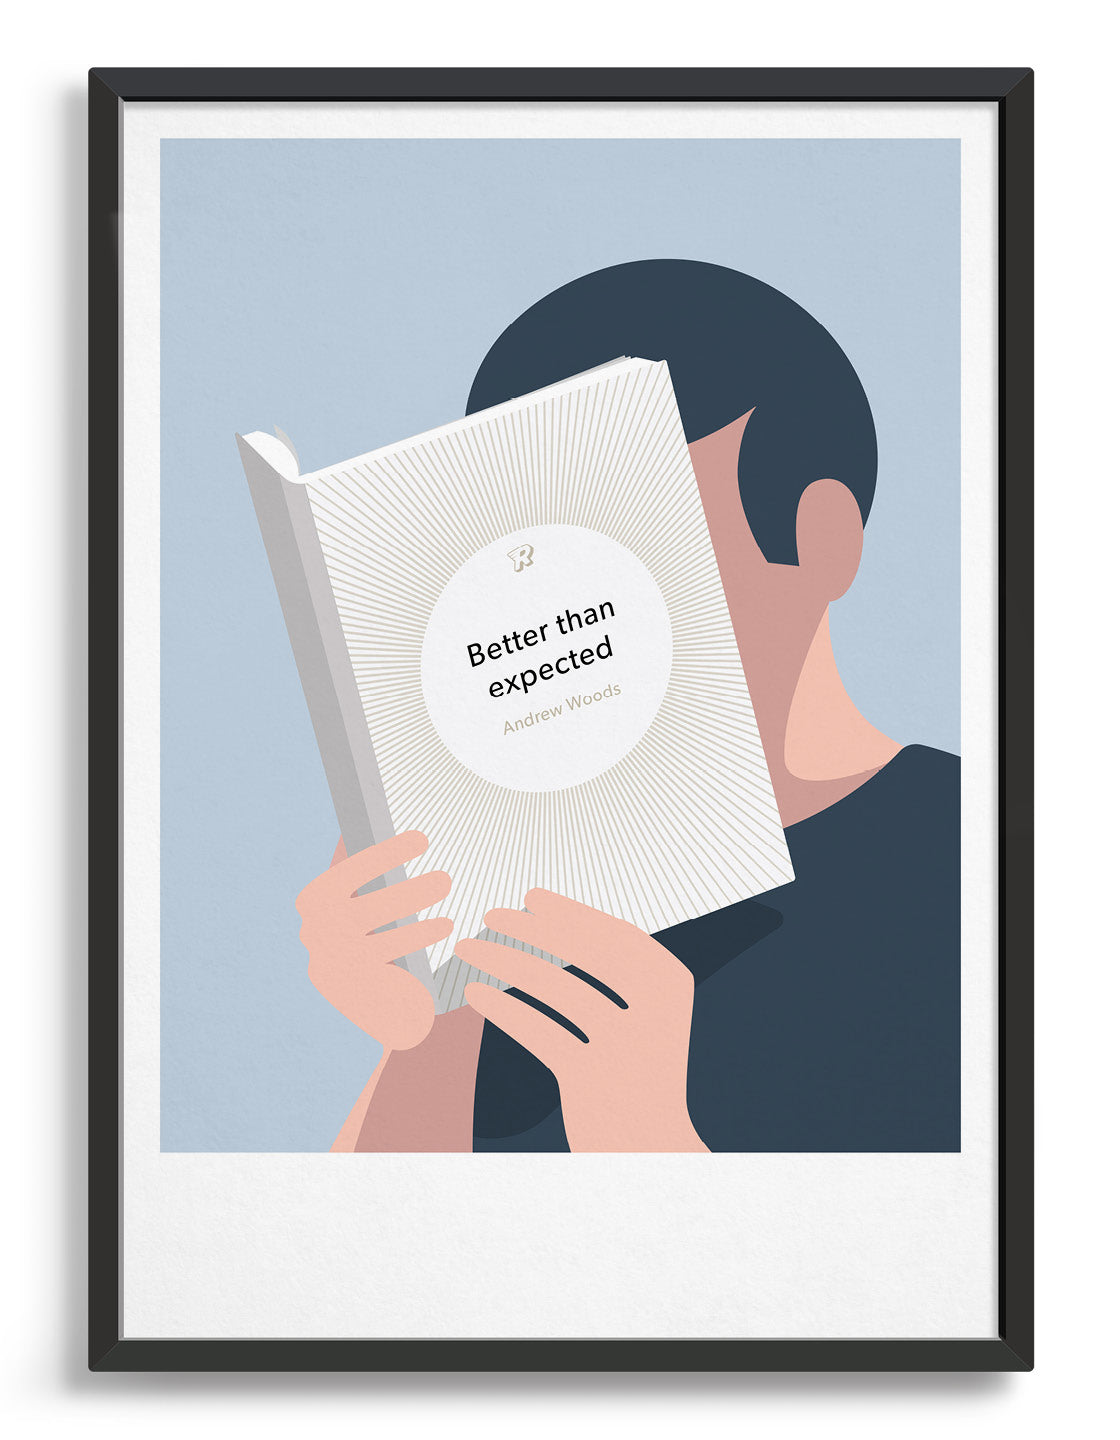 Minimal art print depicting a white person with their head in a book, reading. The book cover can be Personalised, this one has a sunburst design